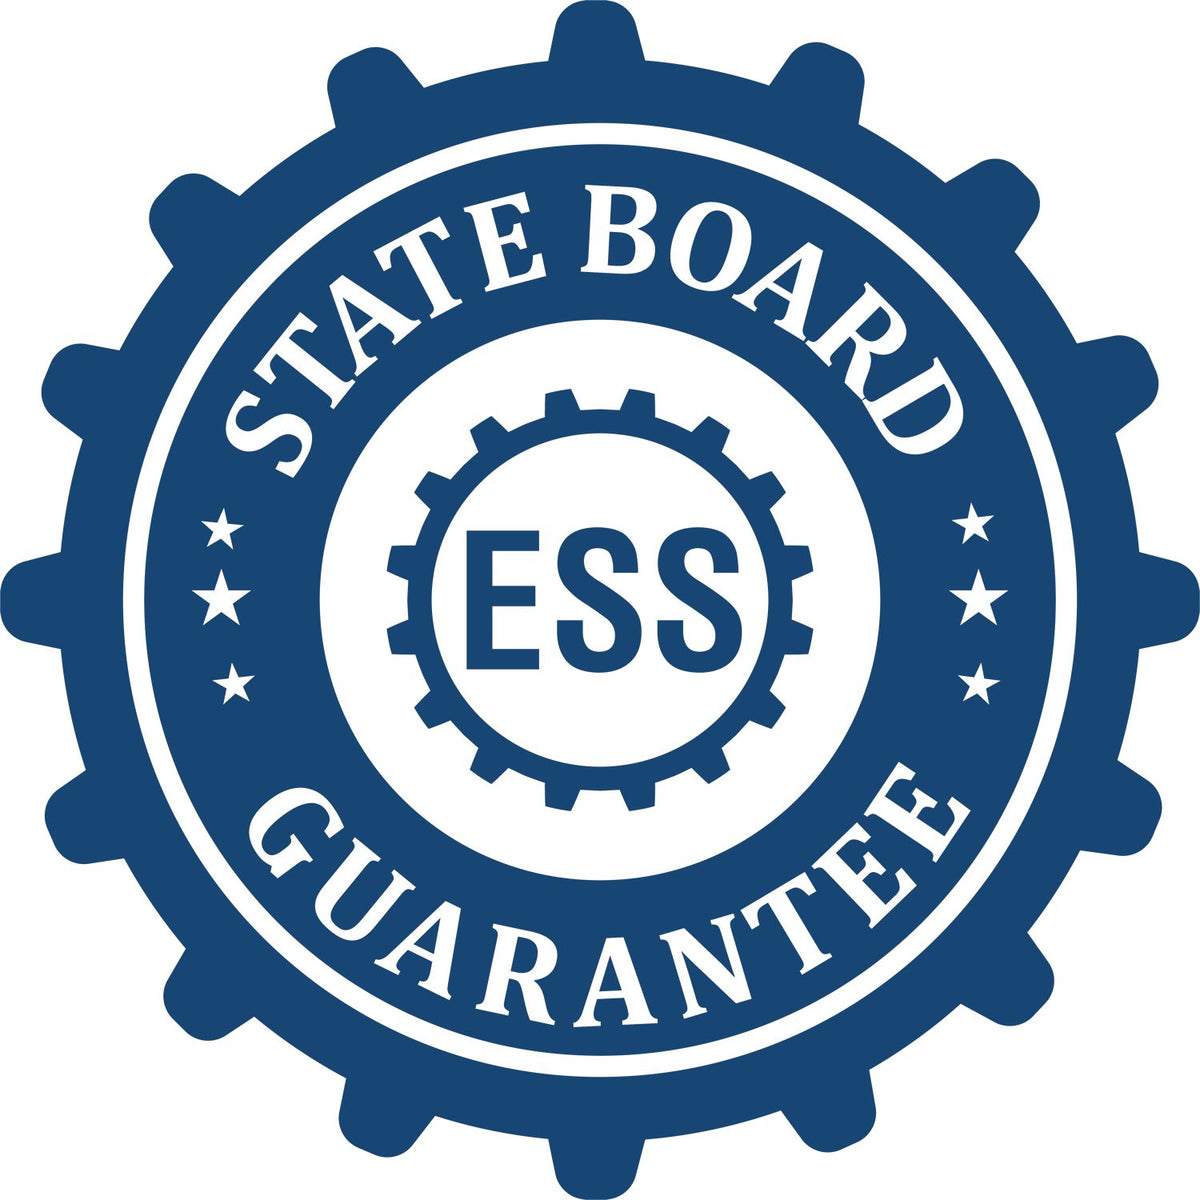 An emblem in a gear shape illustrating a state board guarantee for the Heavy-Duty Kansas Rectangular Notary Stamp product.